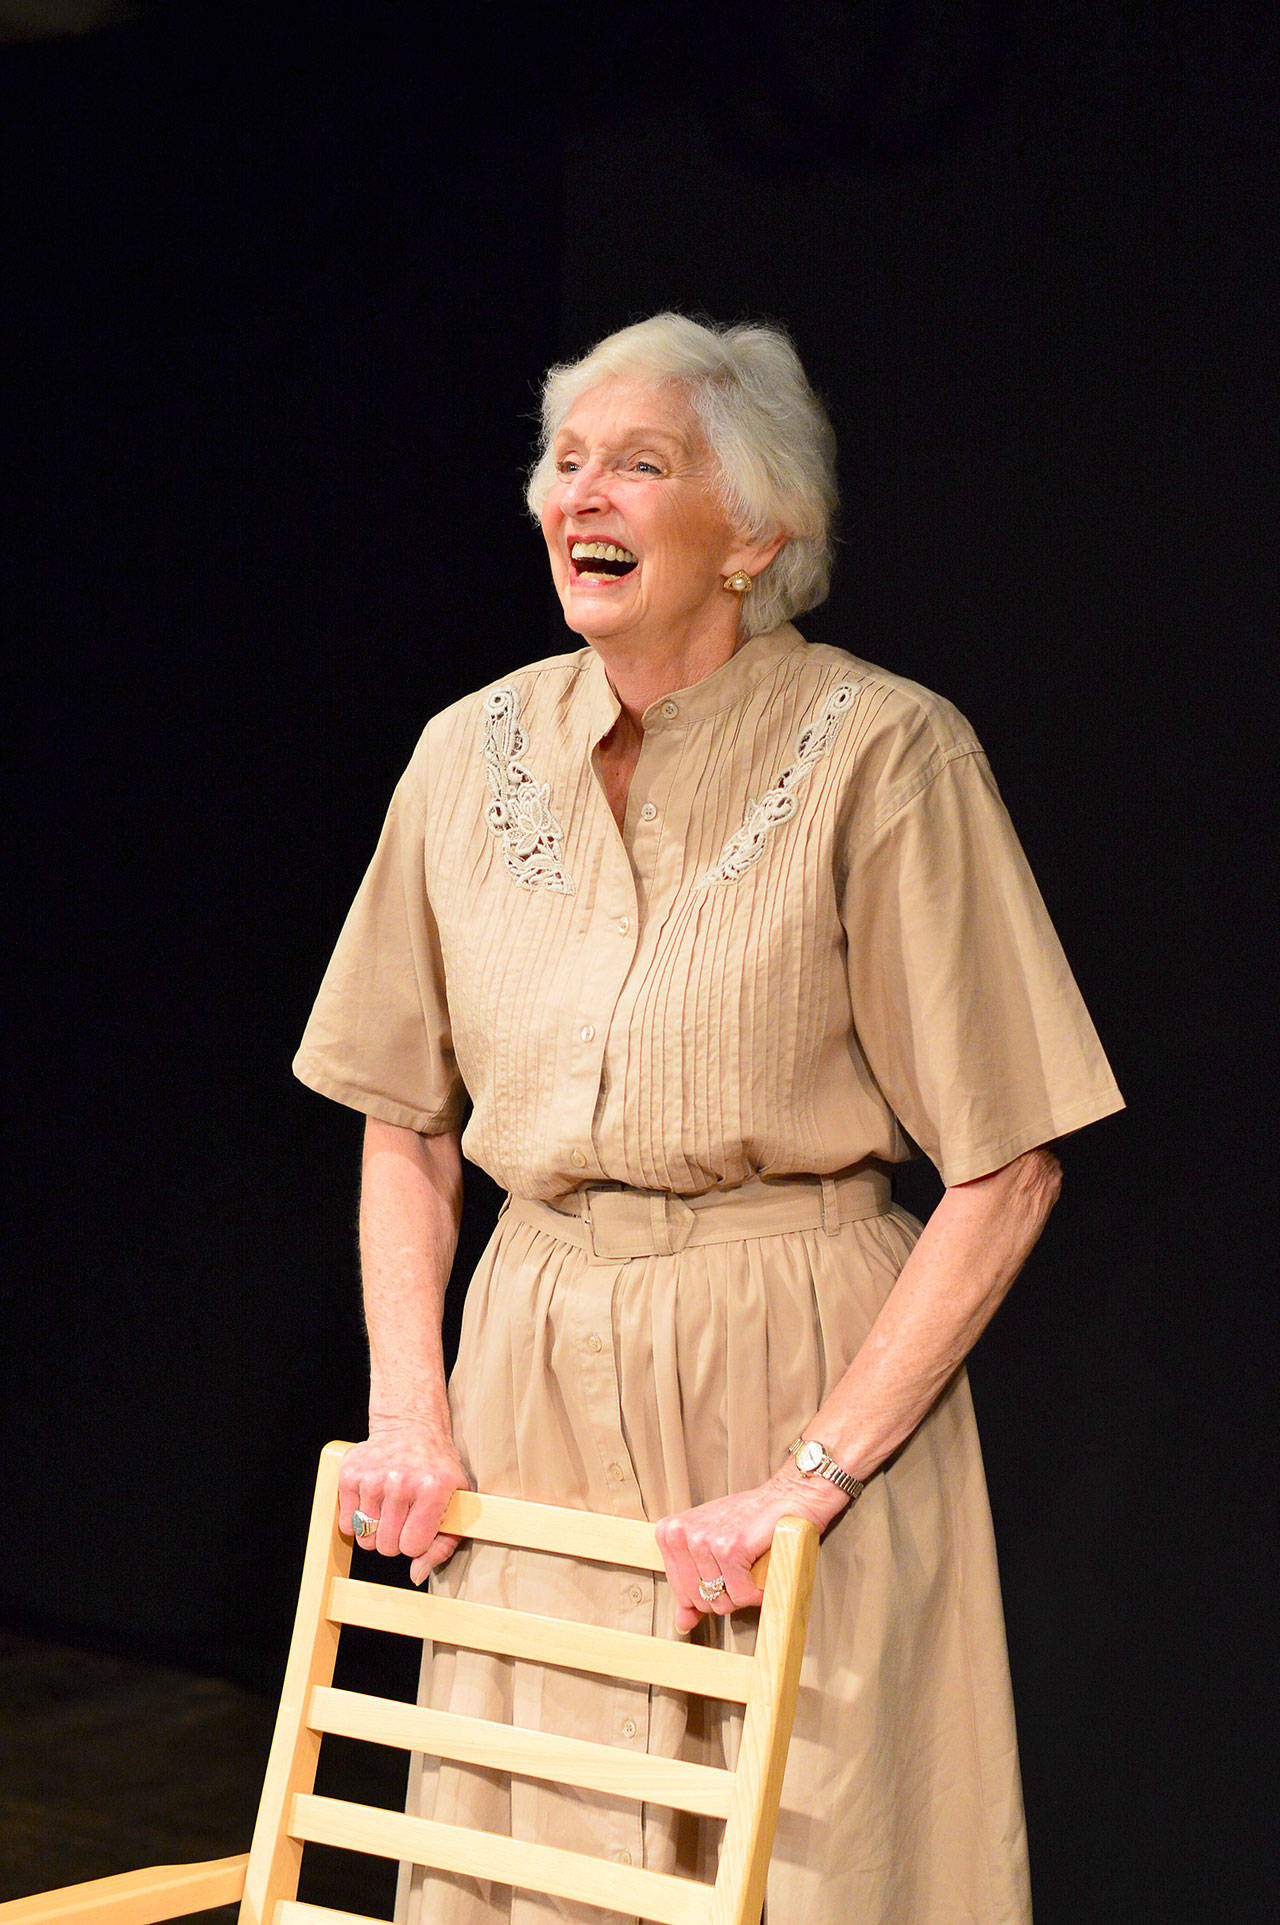 Carol Swarbrick Dries, seen here in her New York City performance as Miss Lillian, brings her one-woman show “More than a President’s Mother: The Lillian Carter Story” to Port Angeles this Saturday. (Diane Urbani de la Paz/For The Peninsula Daily News)